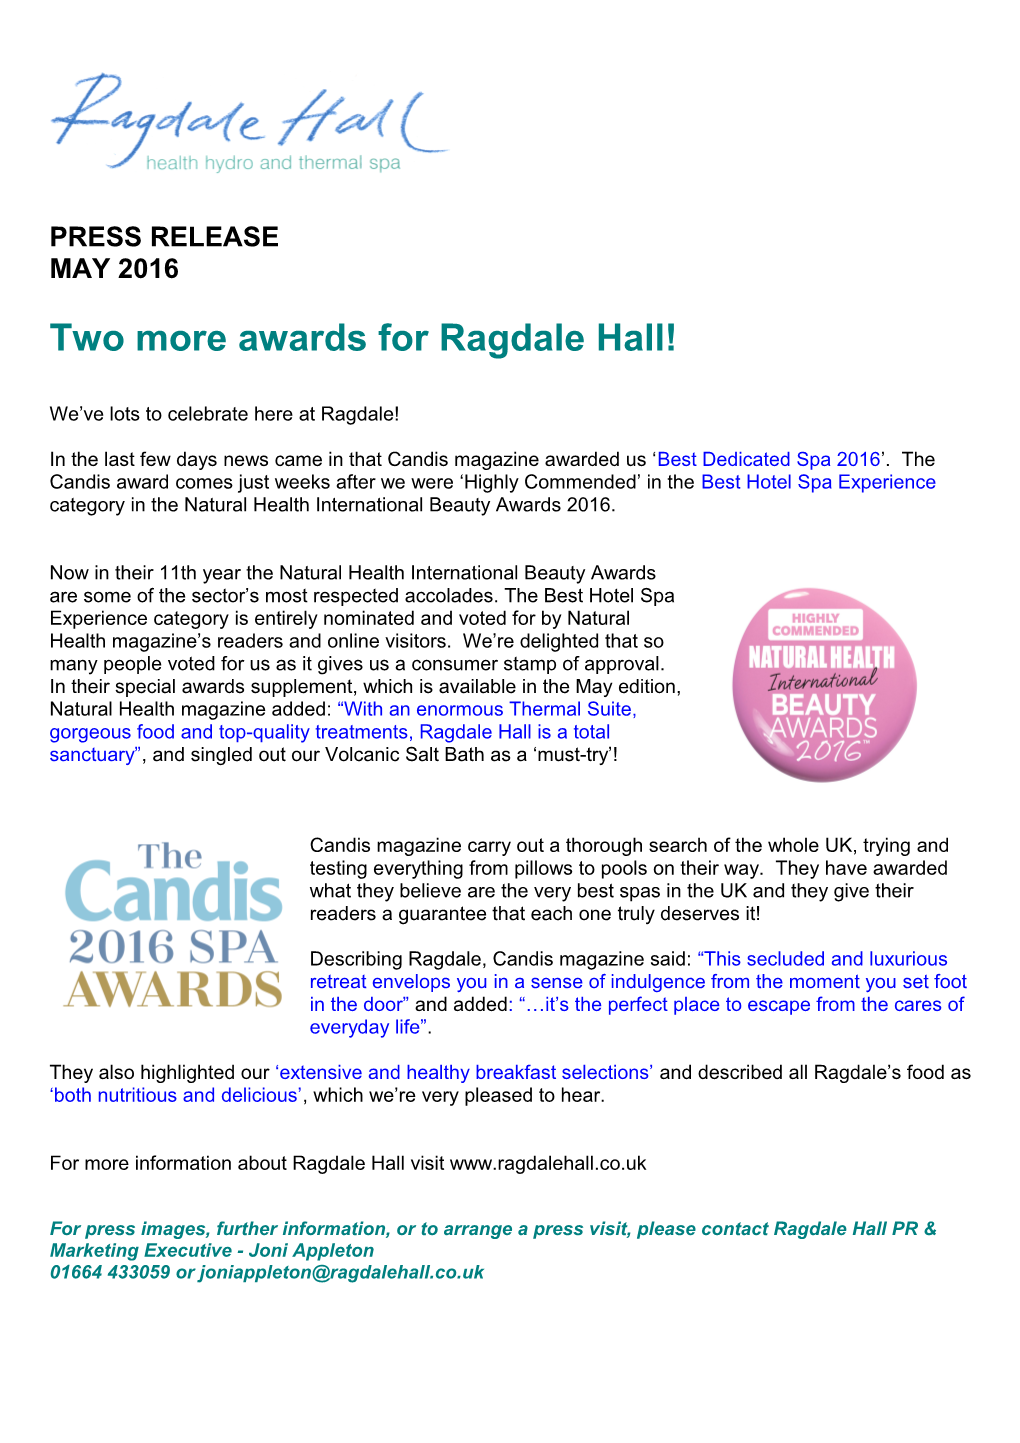 Two More Awards for Ragdale Hall!